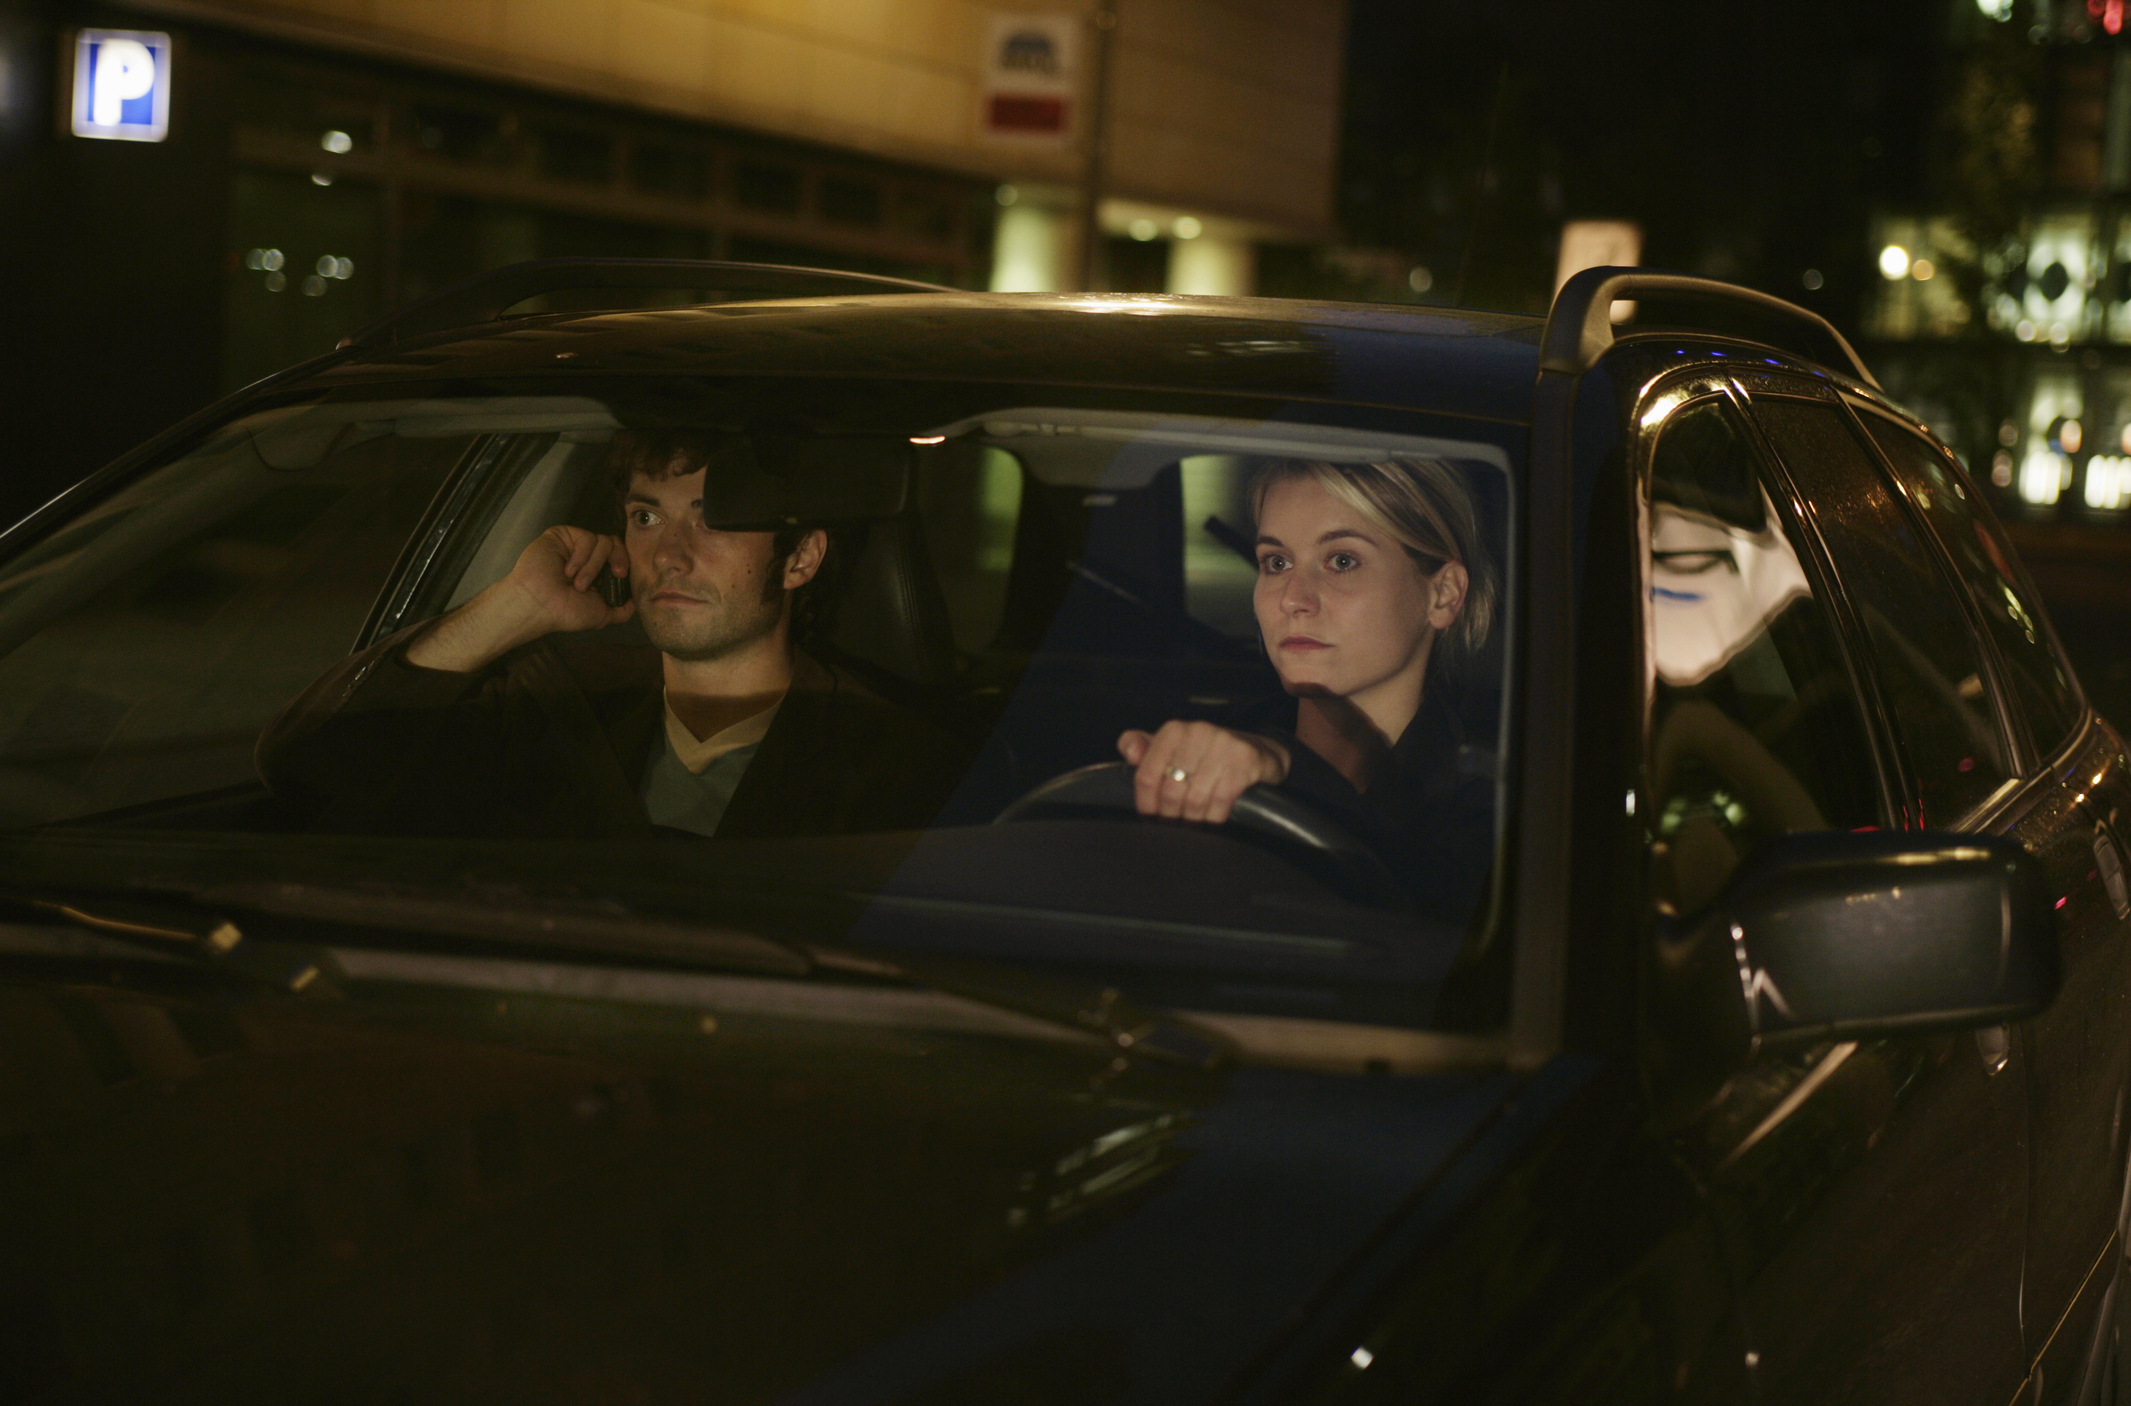 Two people sitting in a car, appearing to have a serious conversation